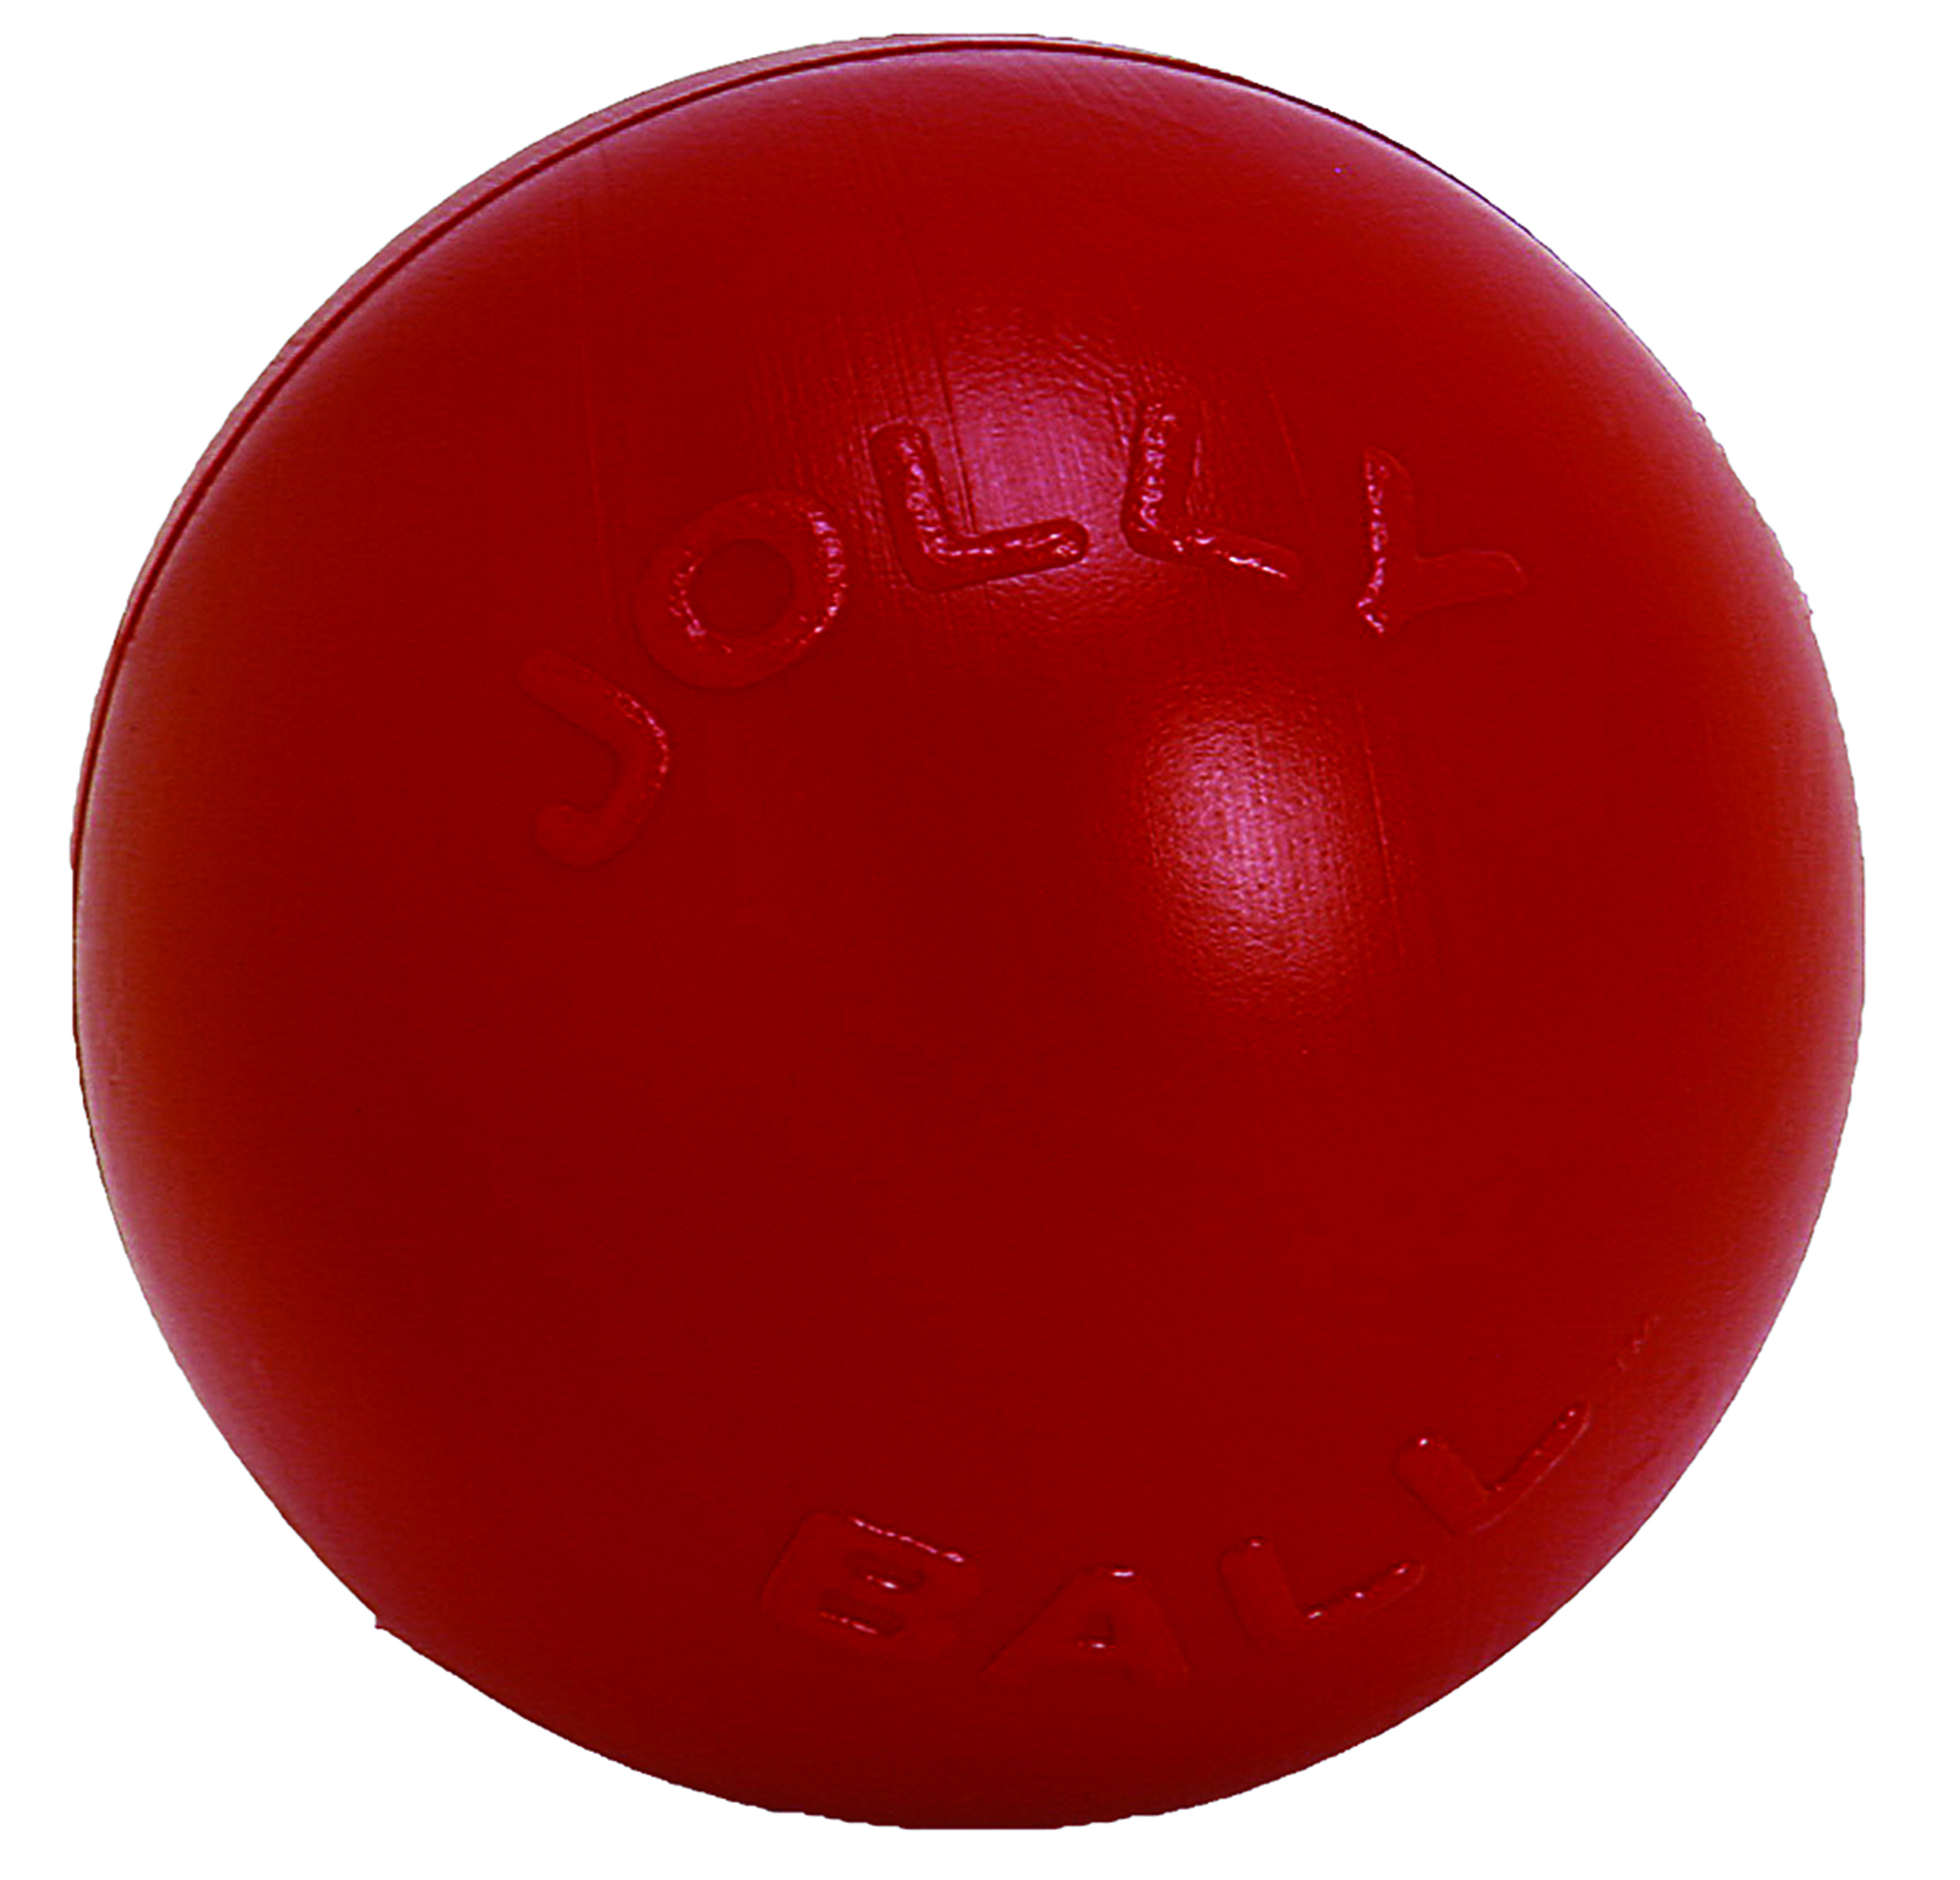 Red Push-N-Play ball, 10 in dog toy